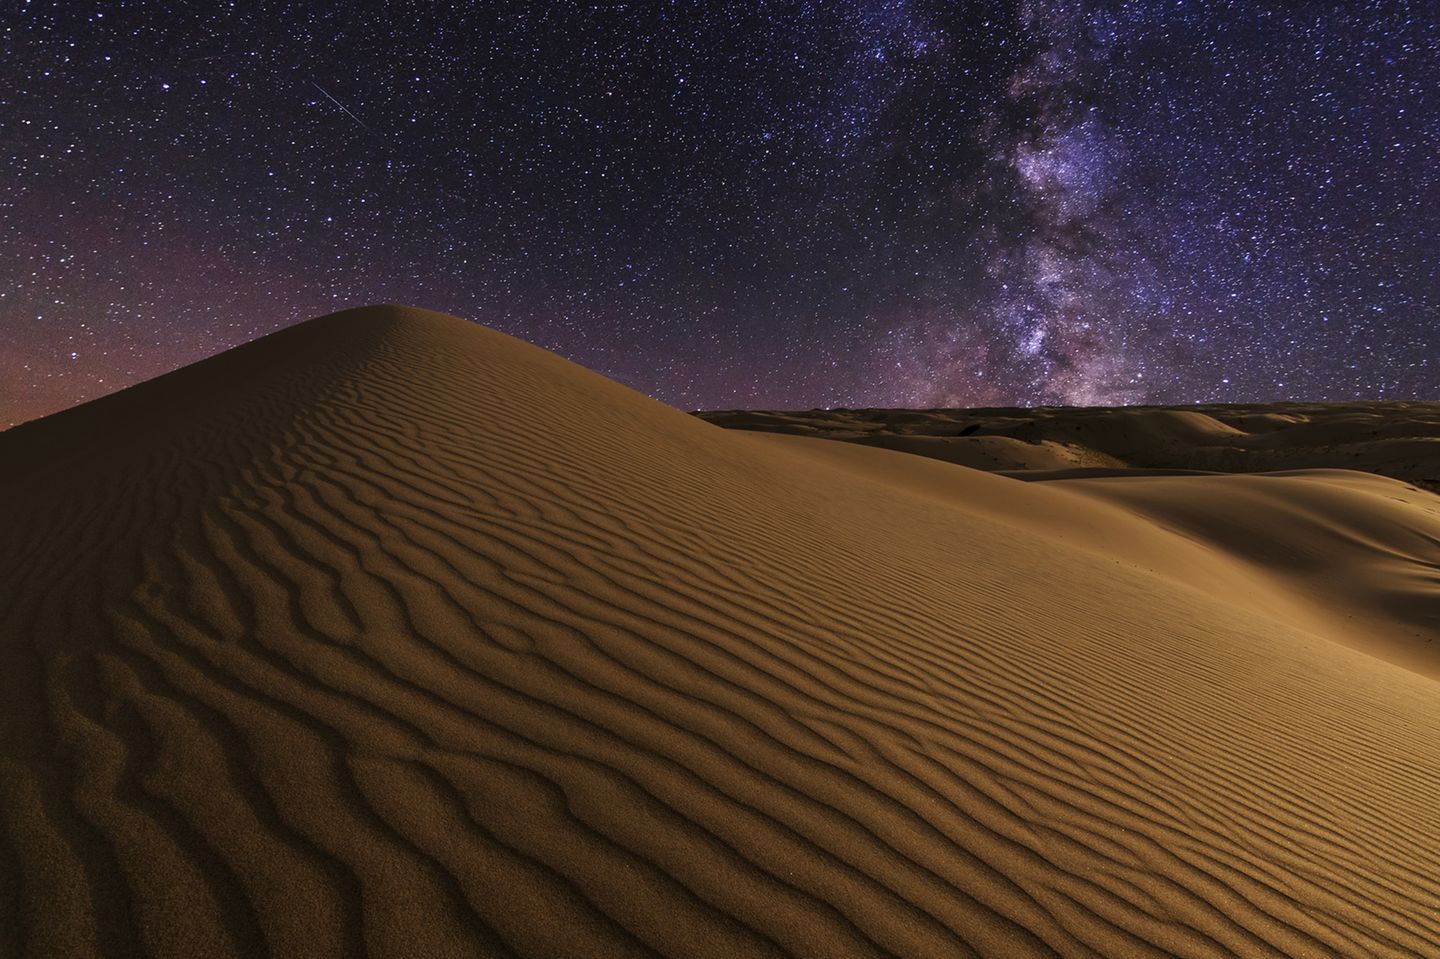 Milky Way and thousands of stars over a desert